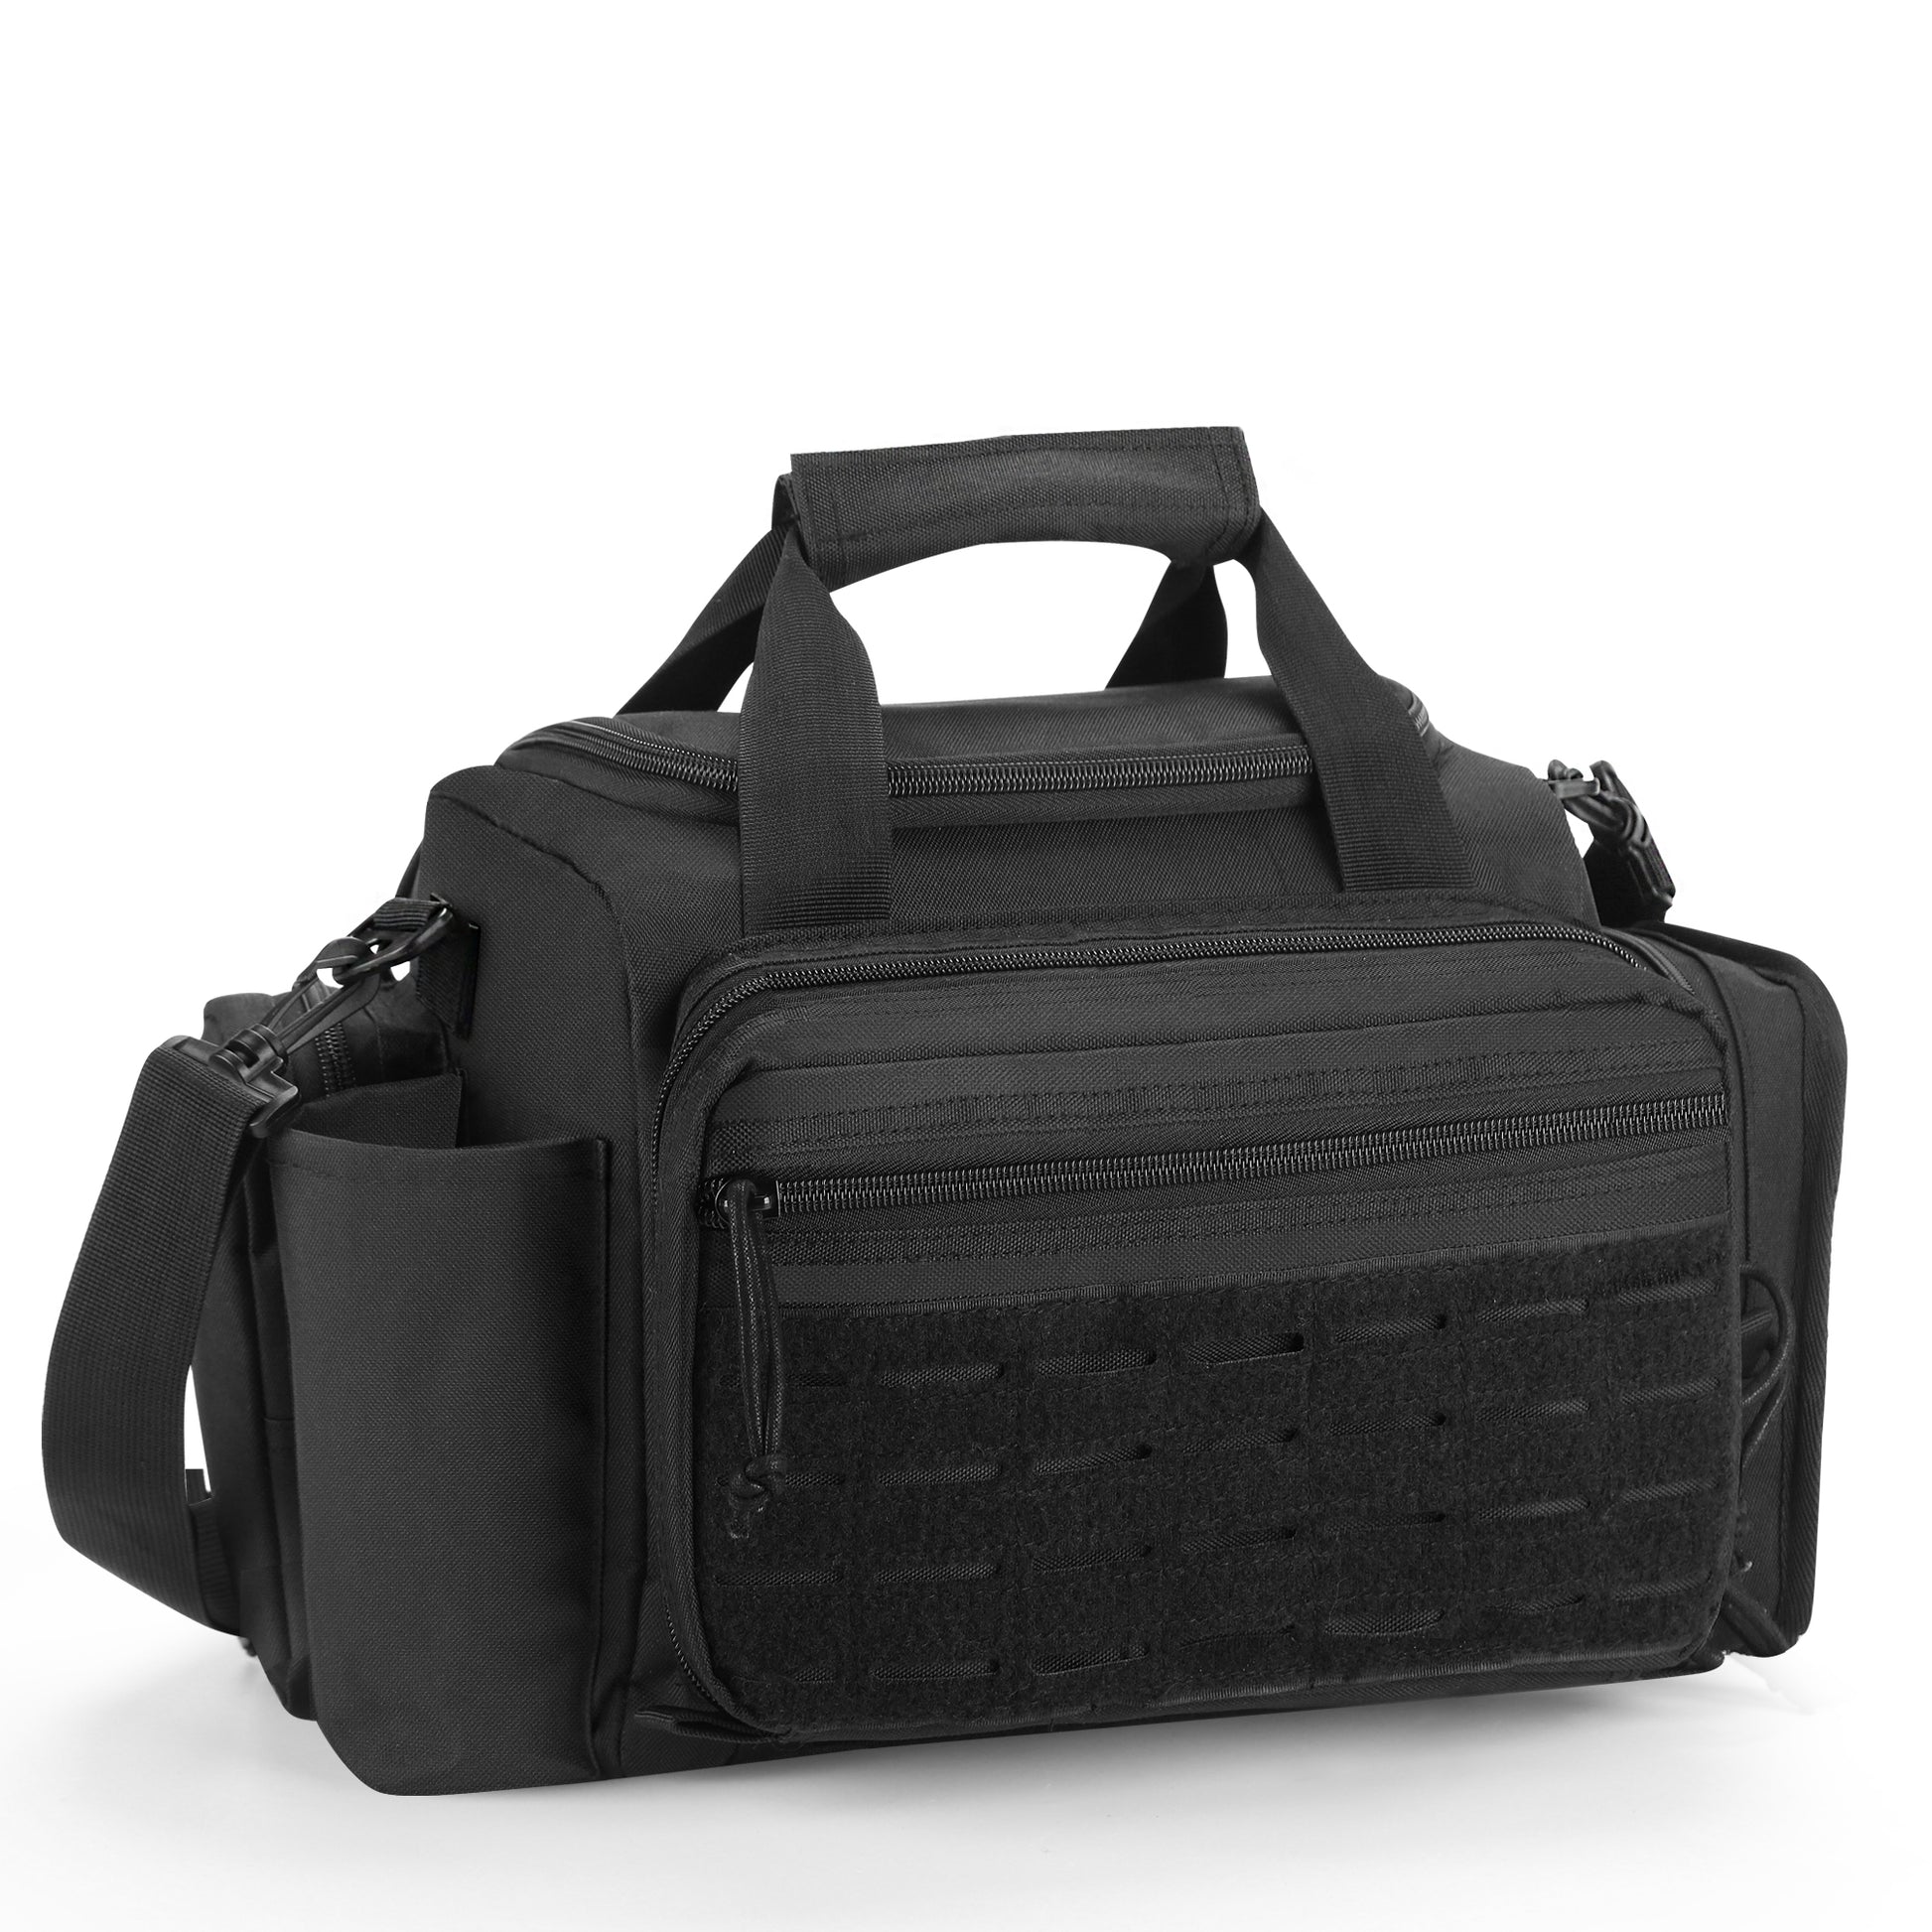 Tactical Firearm Range Bag For Pistol And Ammo, Shooting Luggage Range  Pistol Bag With Magazine Slots Multiple Compartments (black)